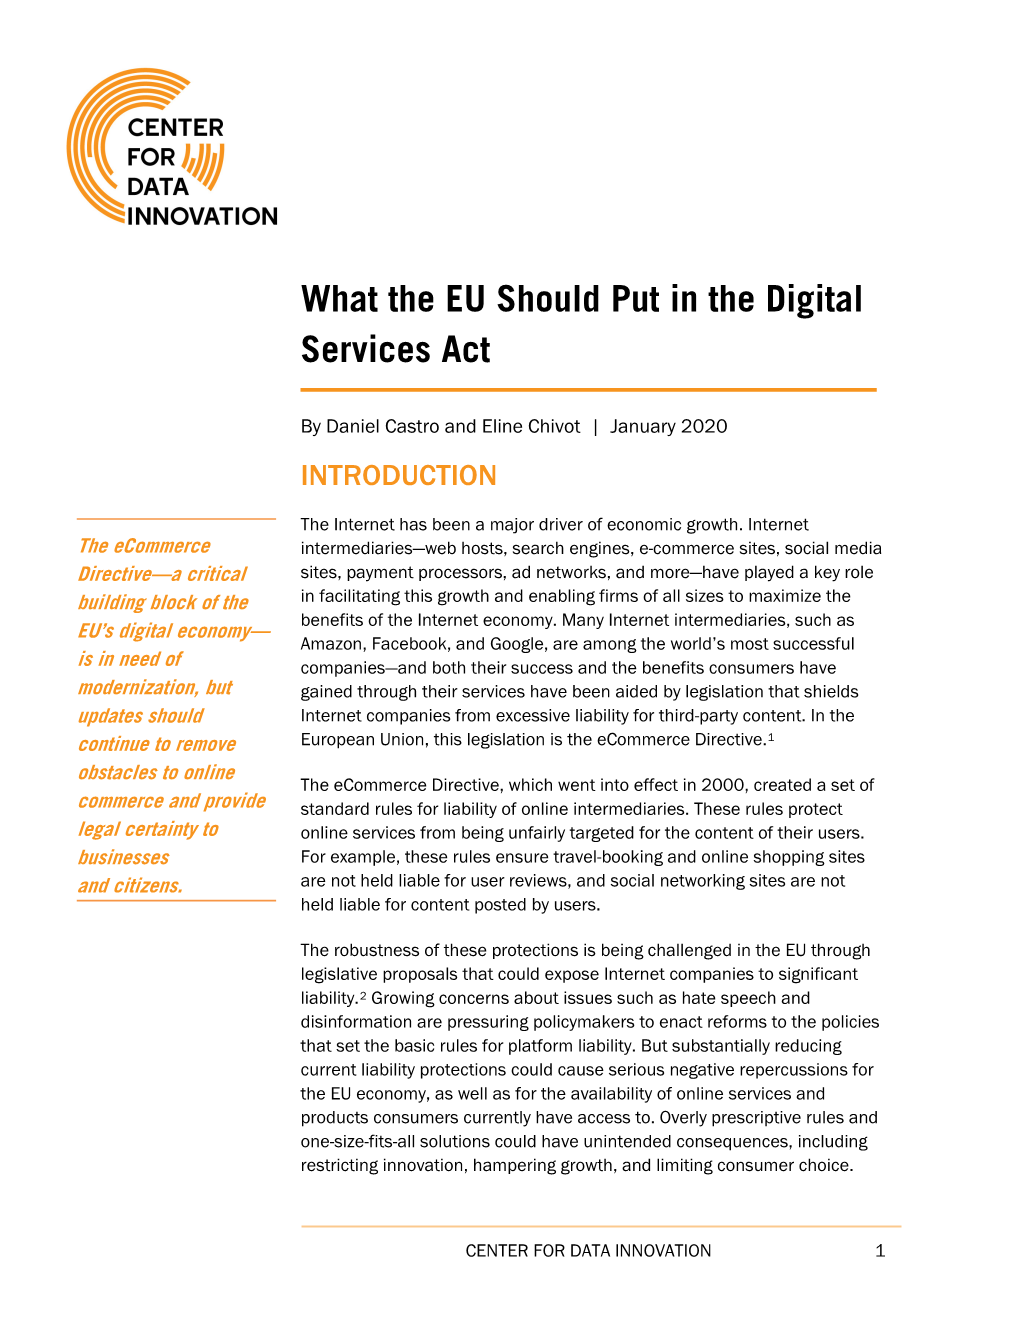 What the EU Shold Put in the Digital Services